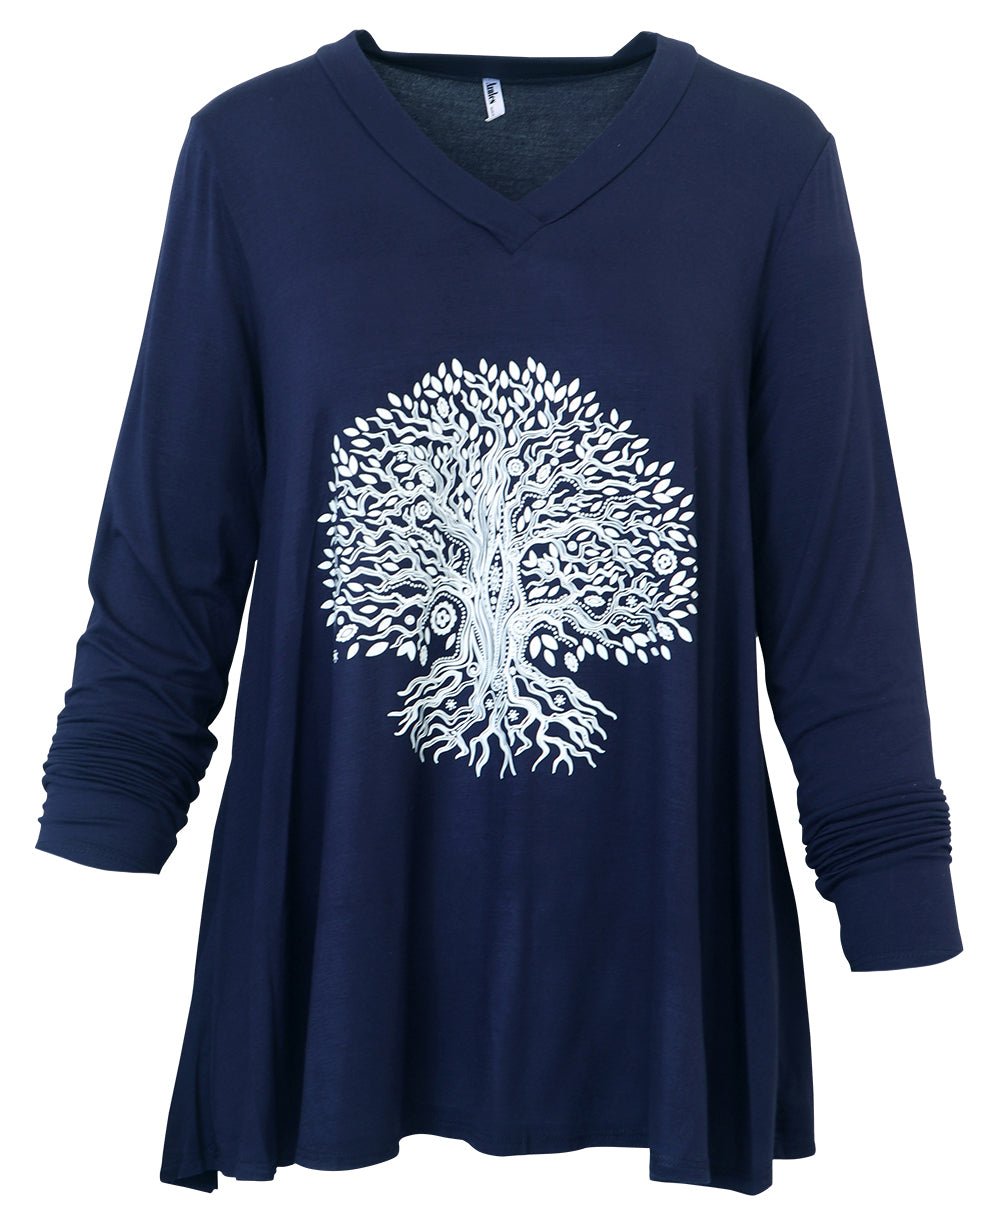 Flowy Navy Blue Tunic Top with Artistic Tree of Life Design - Shirts & Tops S